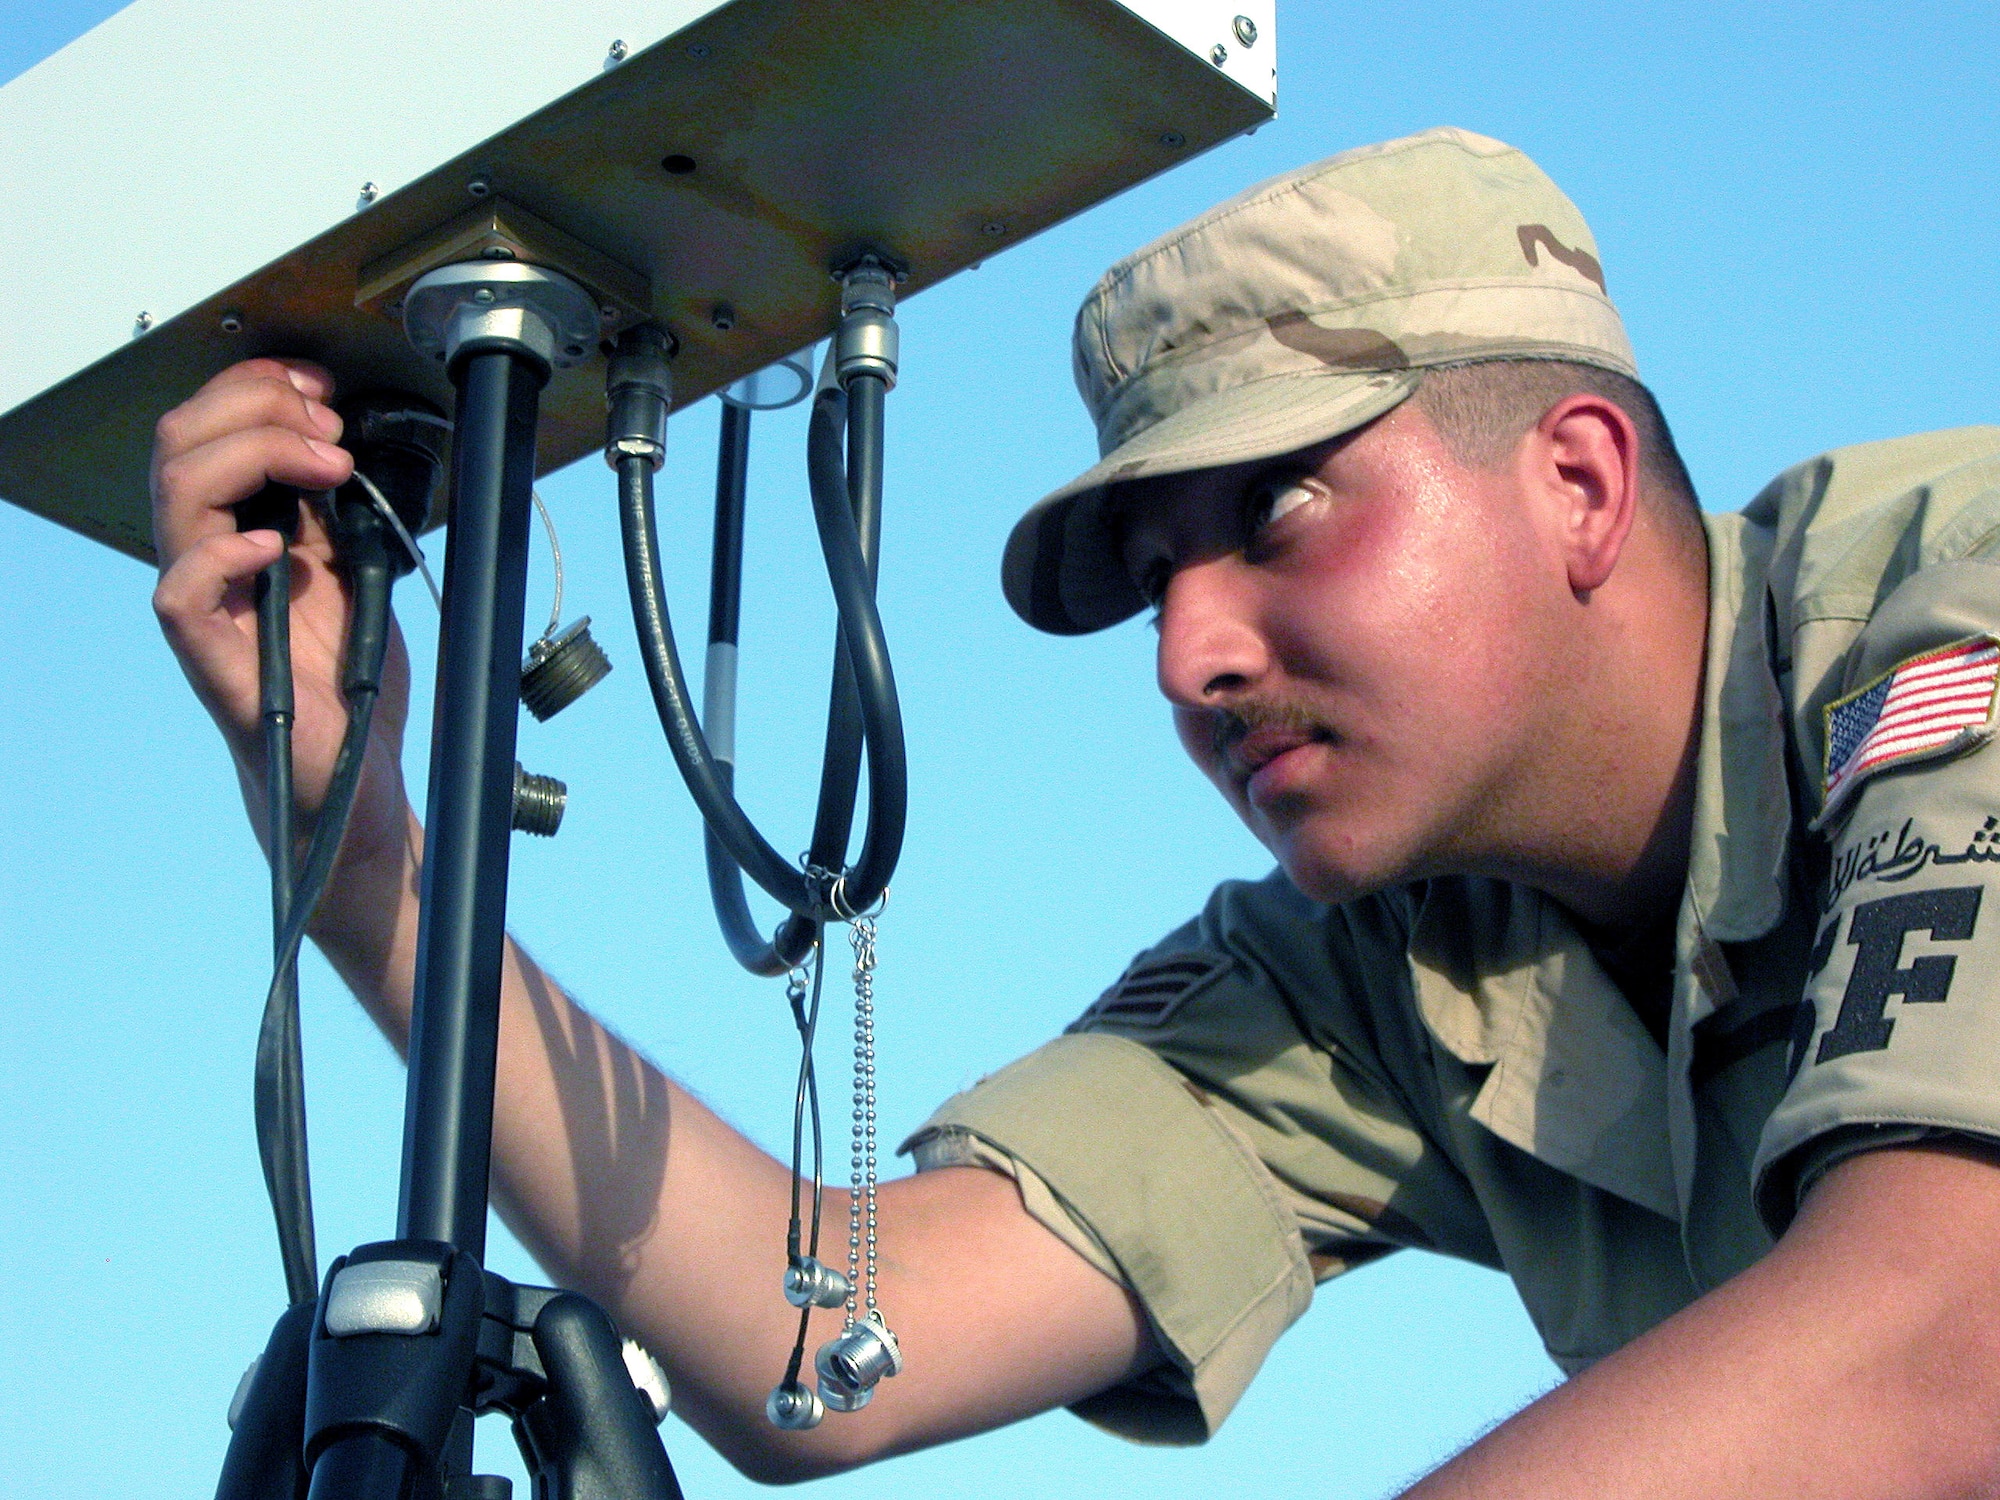 SOUTHWEST ASIA -- Senior Airman Alexander Jimenez makes adjustments to the antenna that controls the Desert Hawk unmanned aerial vehicle.  He is assigned to the 379th Security Forces Squadron's airborne surveillance program and is deployed from Spangdahlem Air Base, Germany.  (U.S. Air Force photo by Staff Sgt. C. Todd Lopez)  